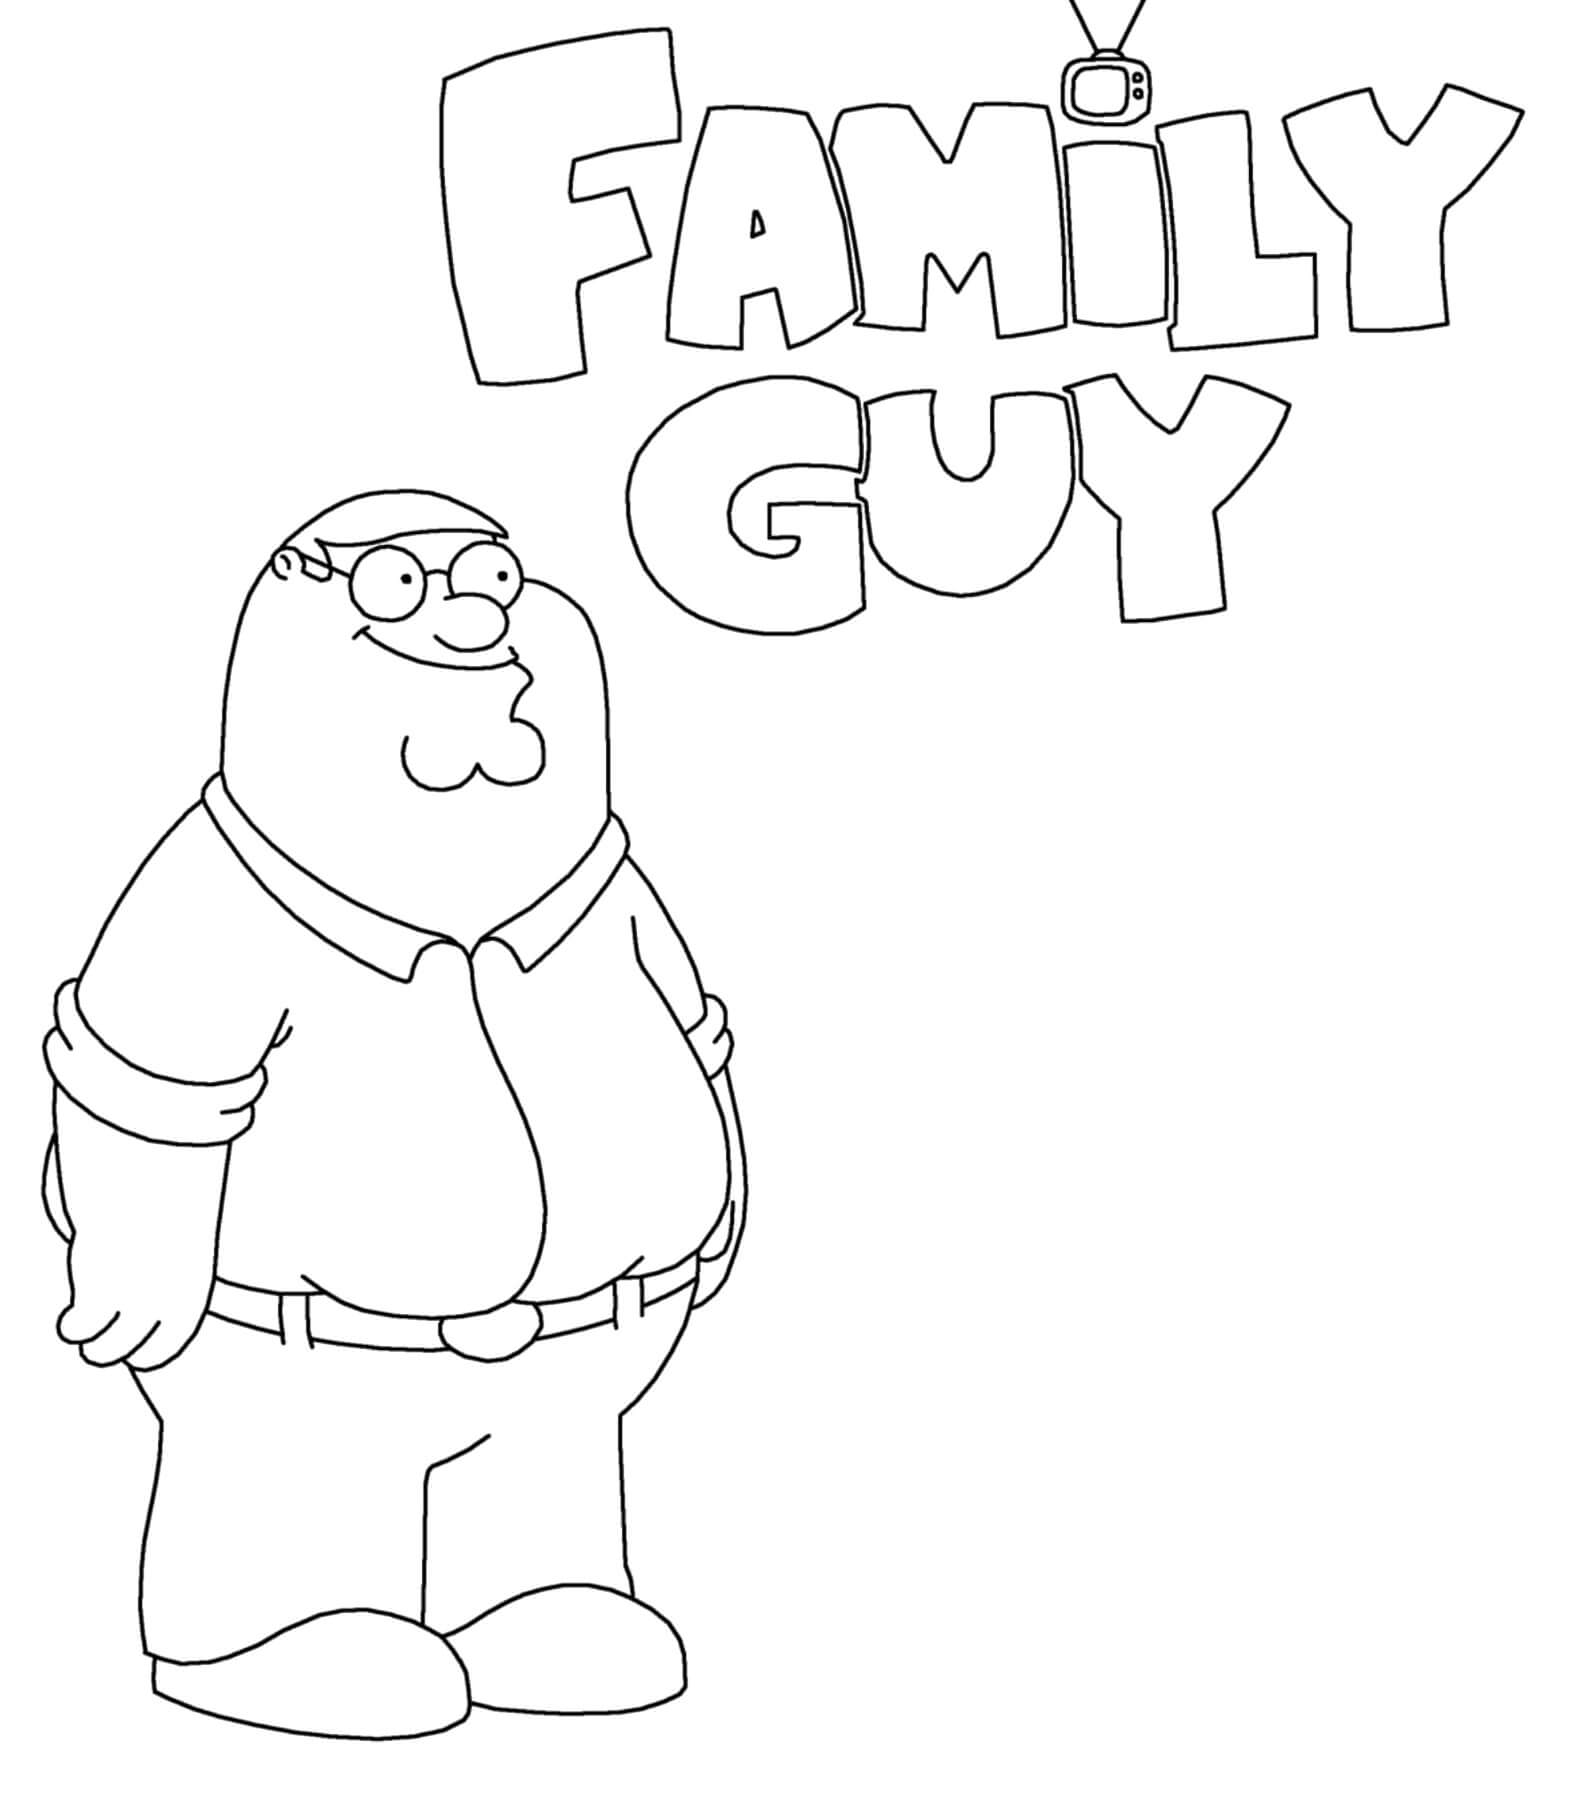 Family Guy Peter Griffin Cartoon